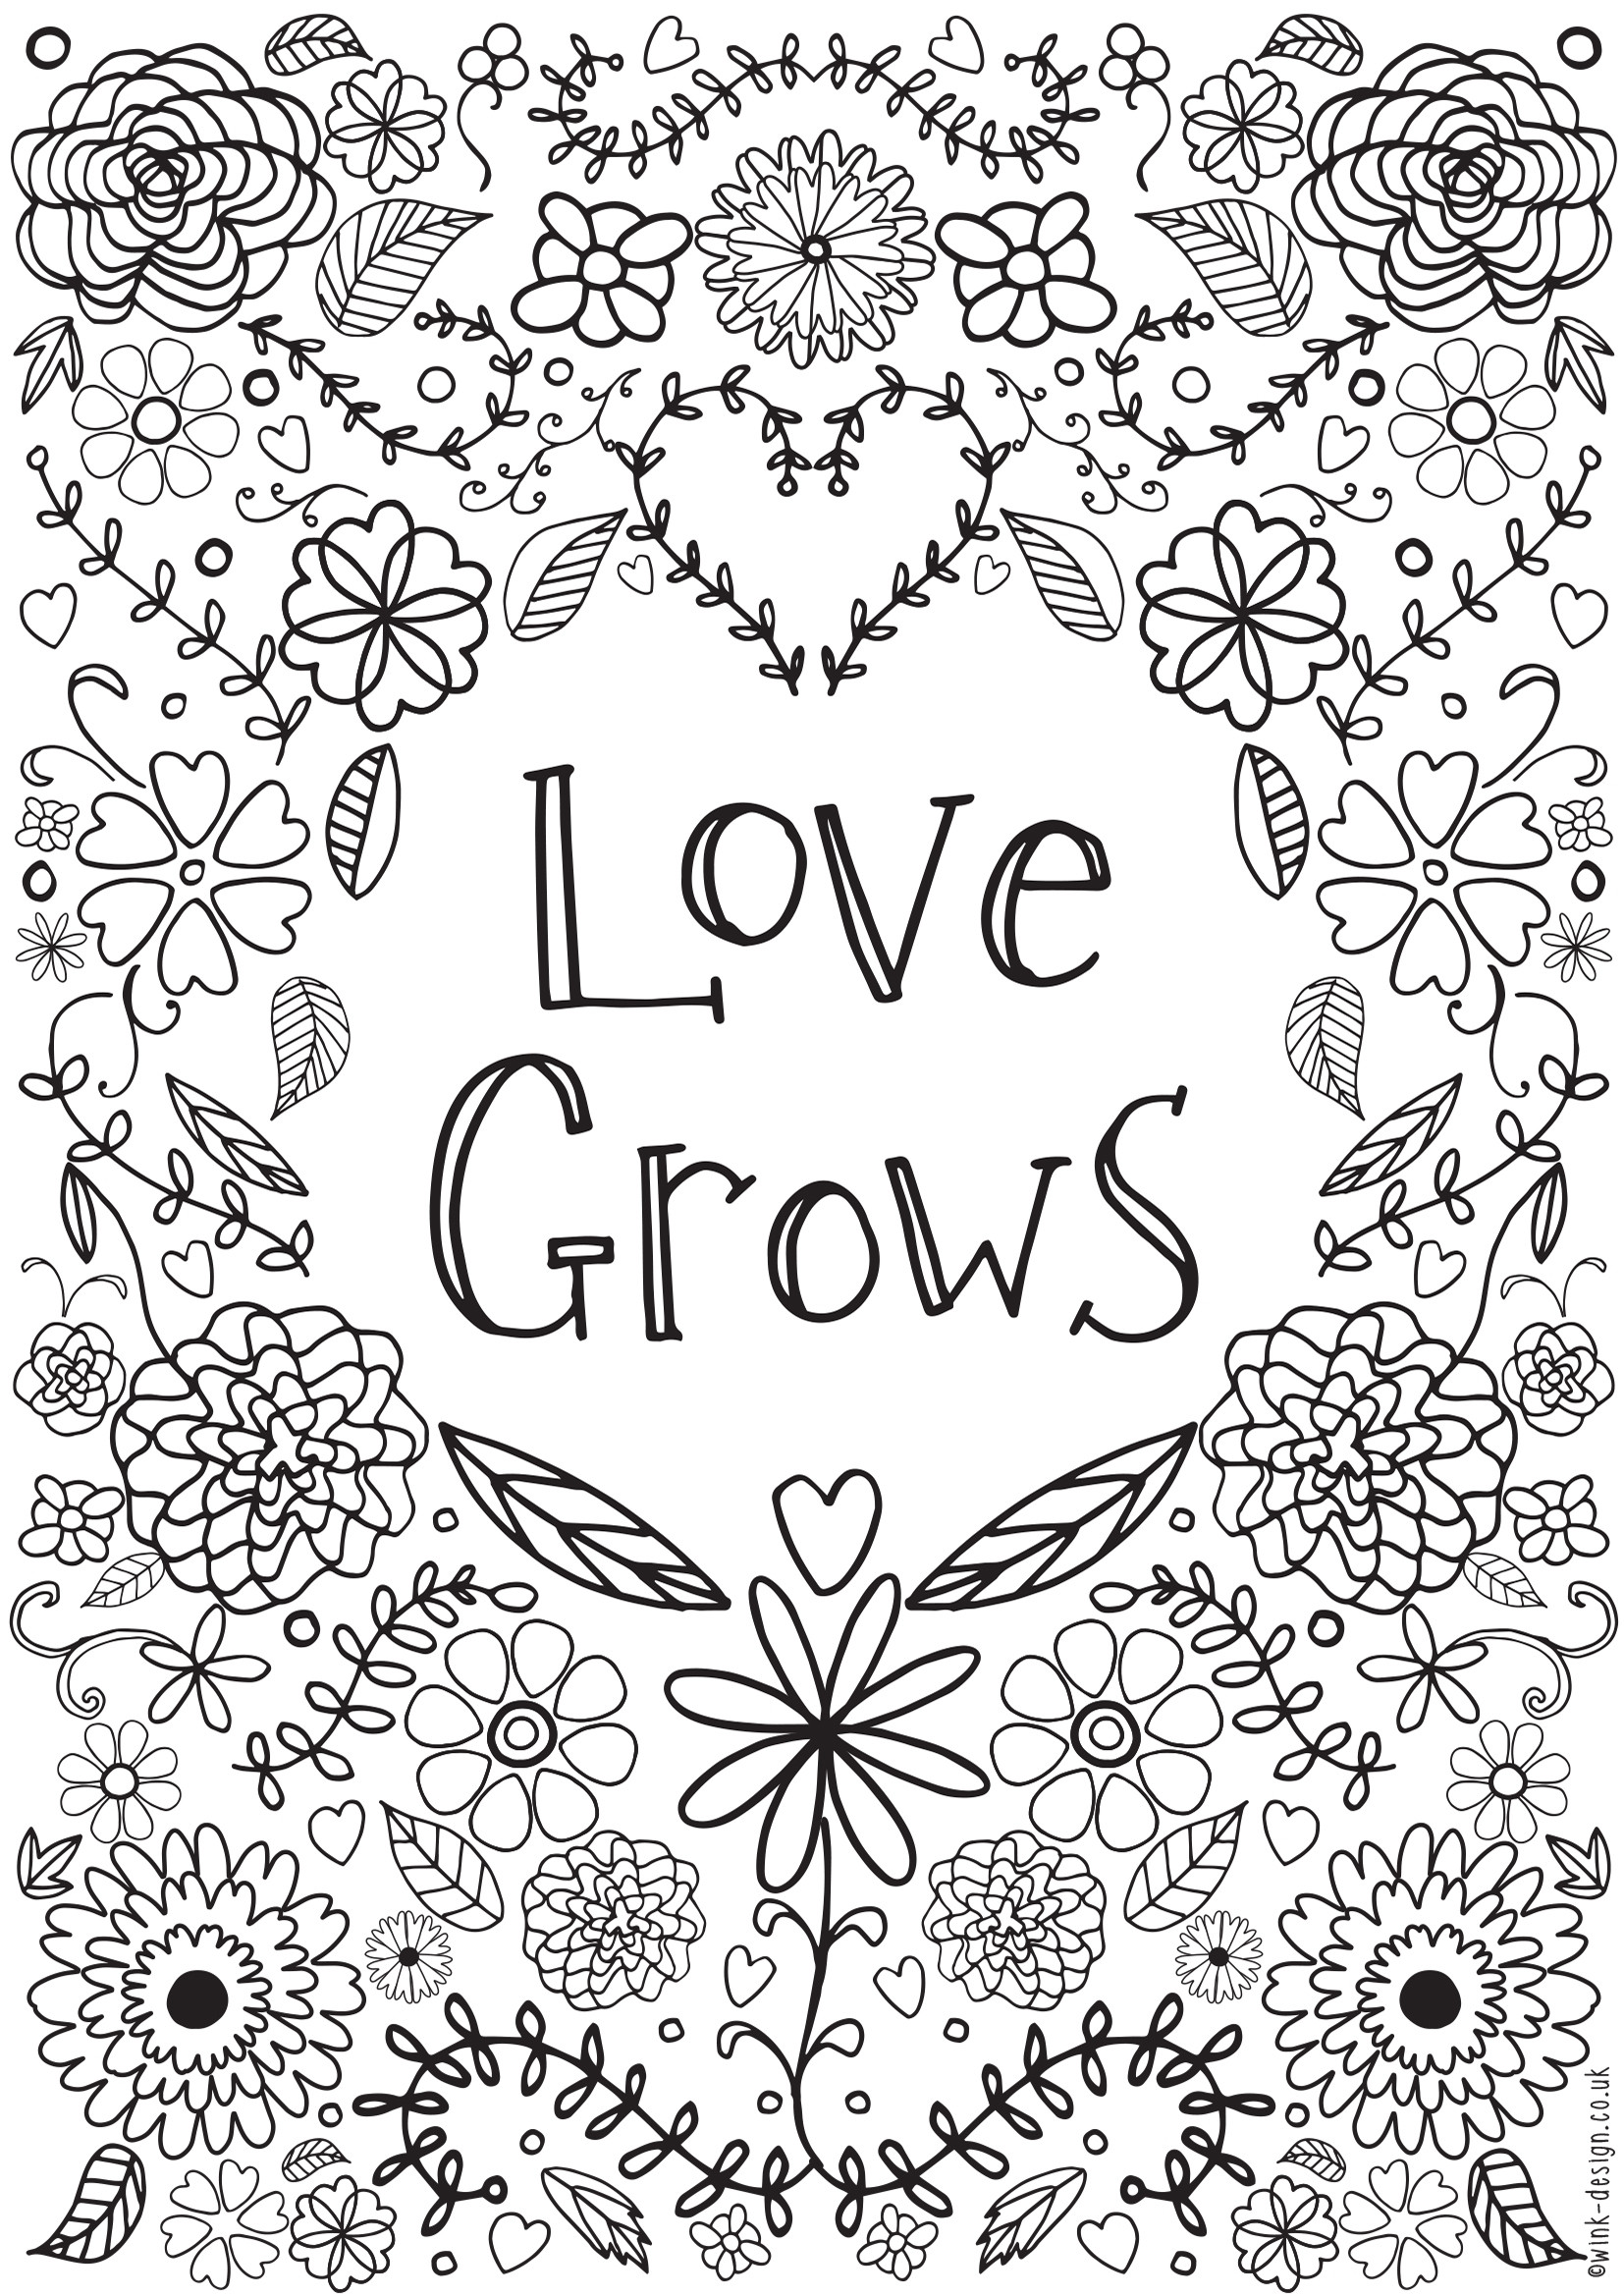 Coloring Pages For Adults Love
 Free Printable Adult Colouring Pages Inspirational Quotes